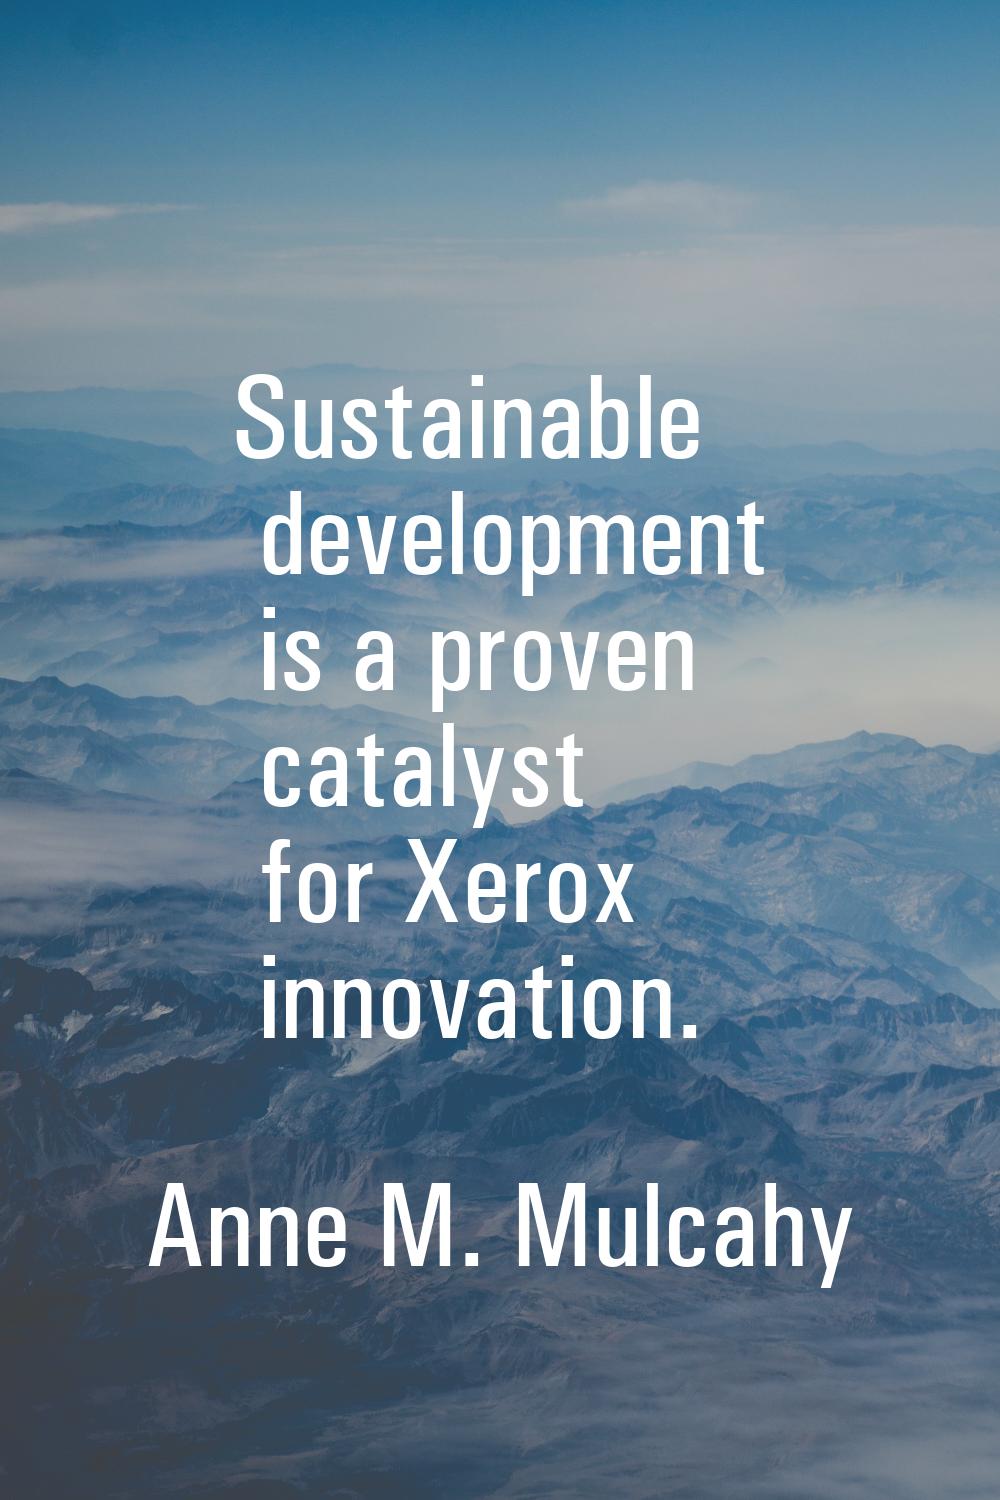 Sustainable development is a proven catalyst for Xerox innovation.